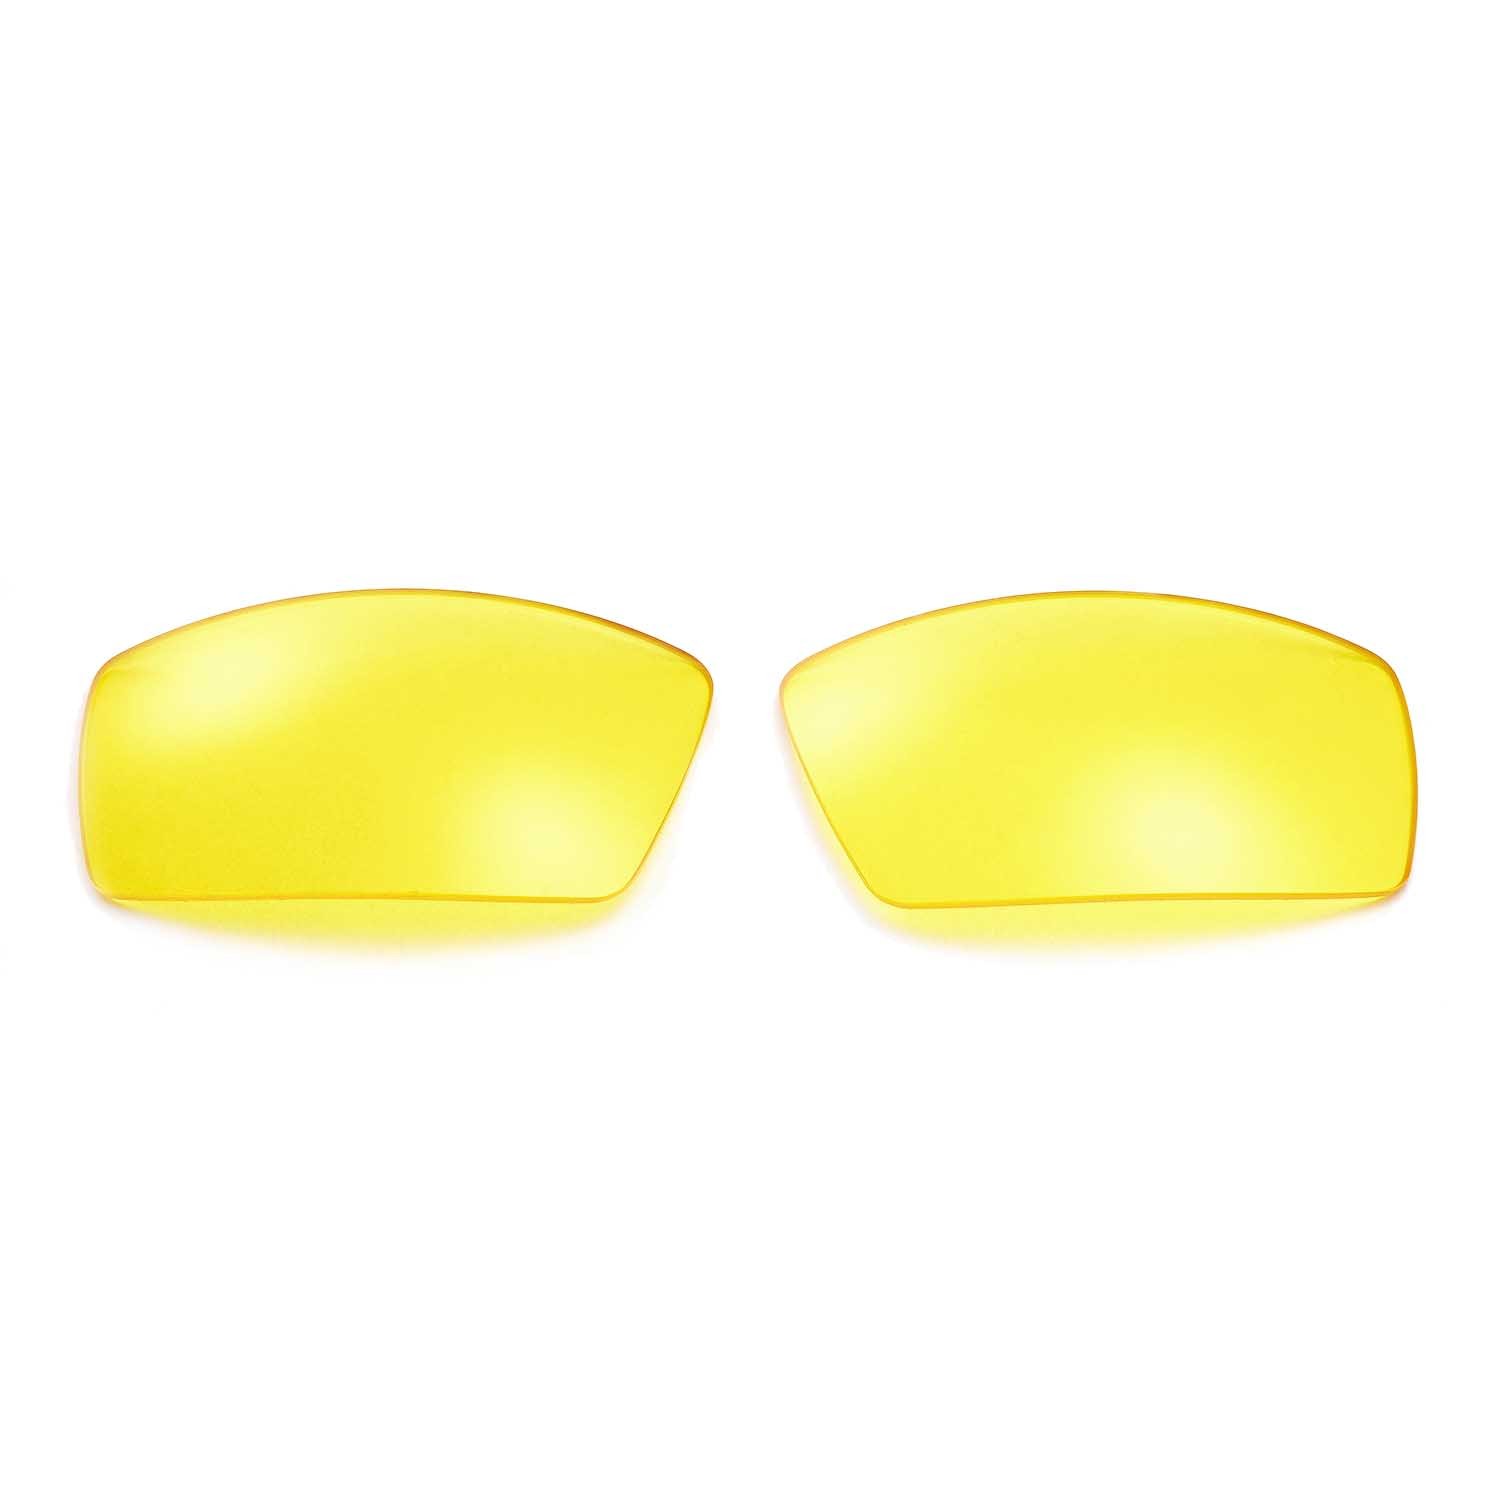 2021 Custom Size lens Color A Grade uv400 TAC Polarized Mirrored Sunglasses Lenses with wholesale price